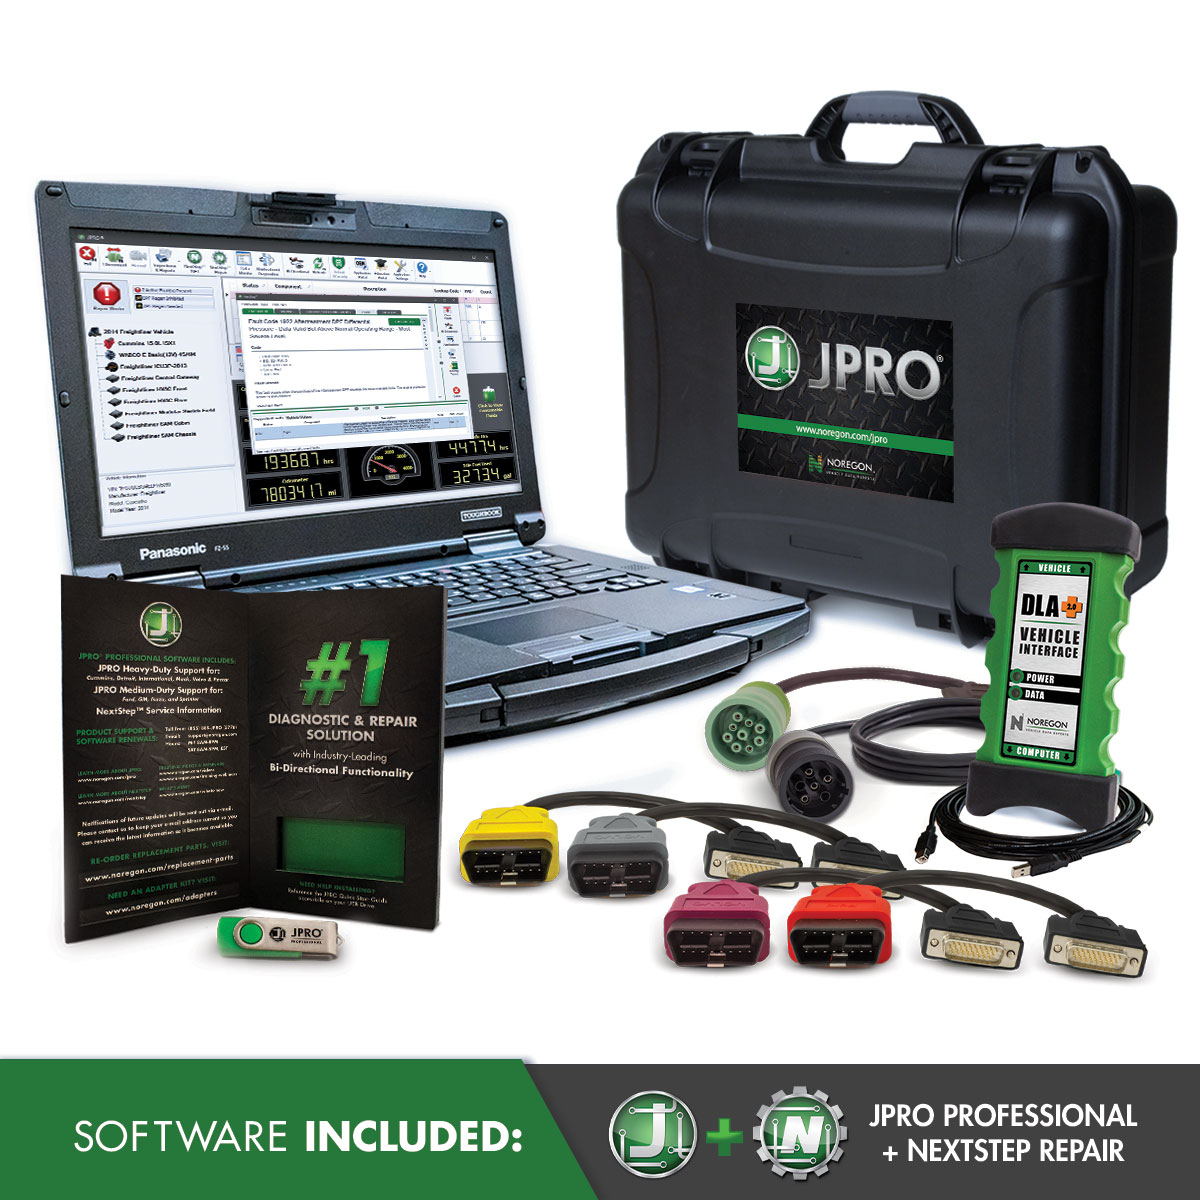 JPRO Professional with Fault Guidance and NextStep Repair Diagnostic Toolbox